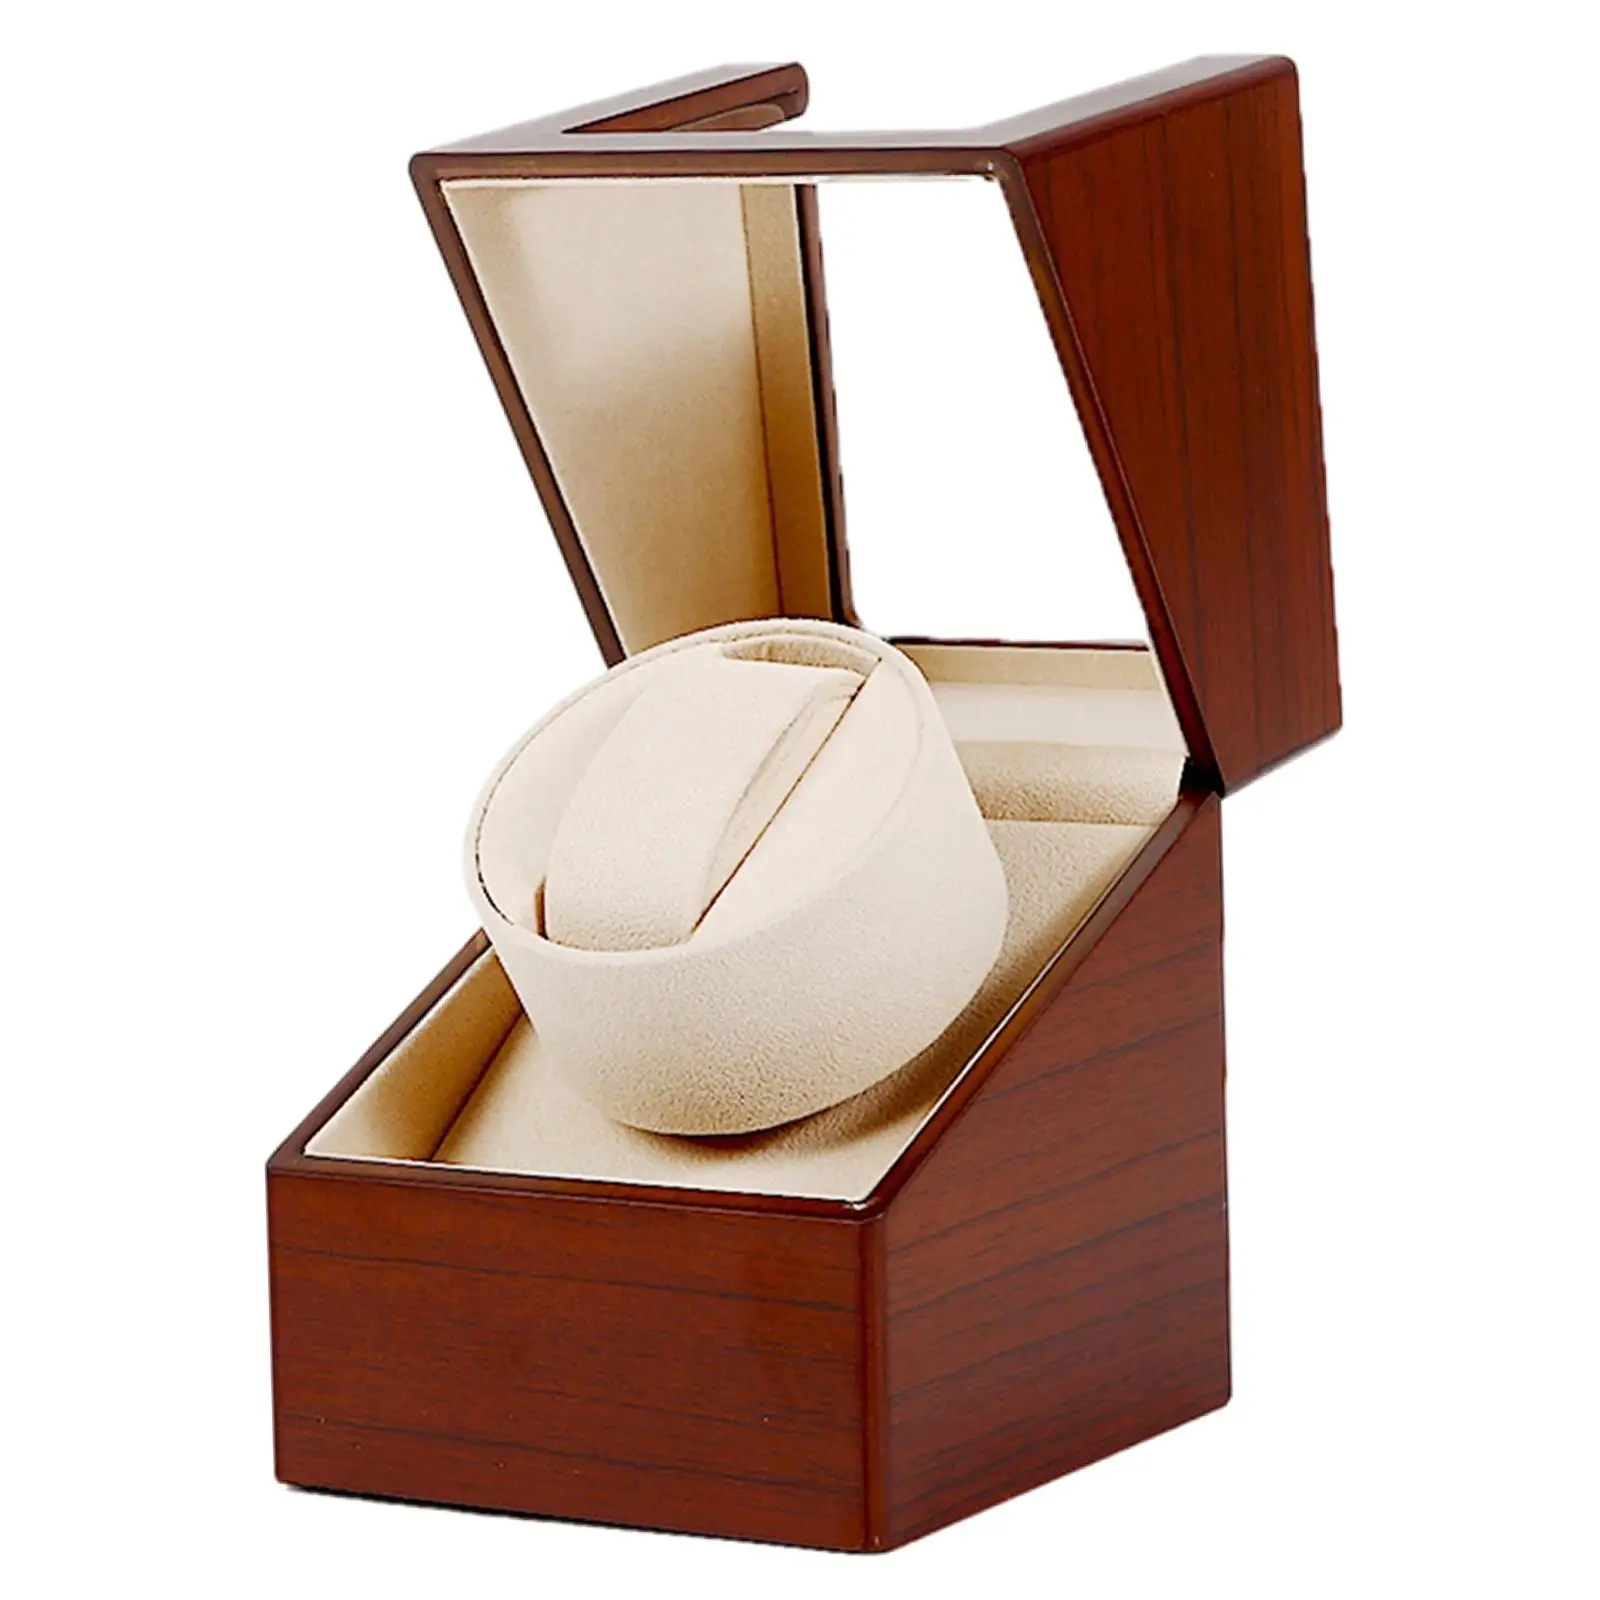 Automatic Single Watch Winder AC Adapter Wooden with View Window Flexible s Winding Storage Case for Women/Men`s Watches